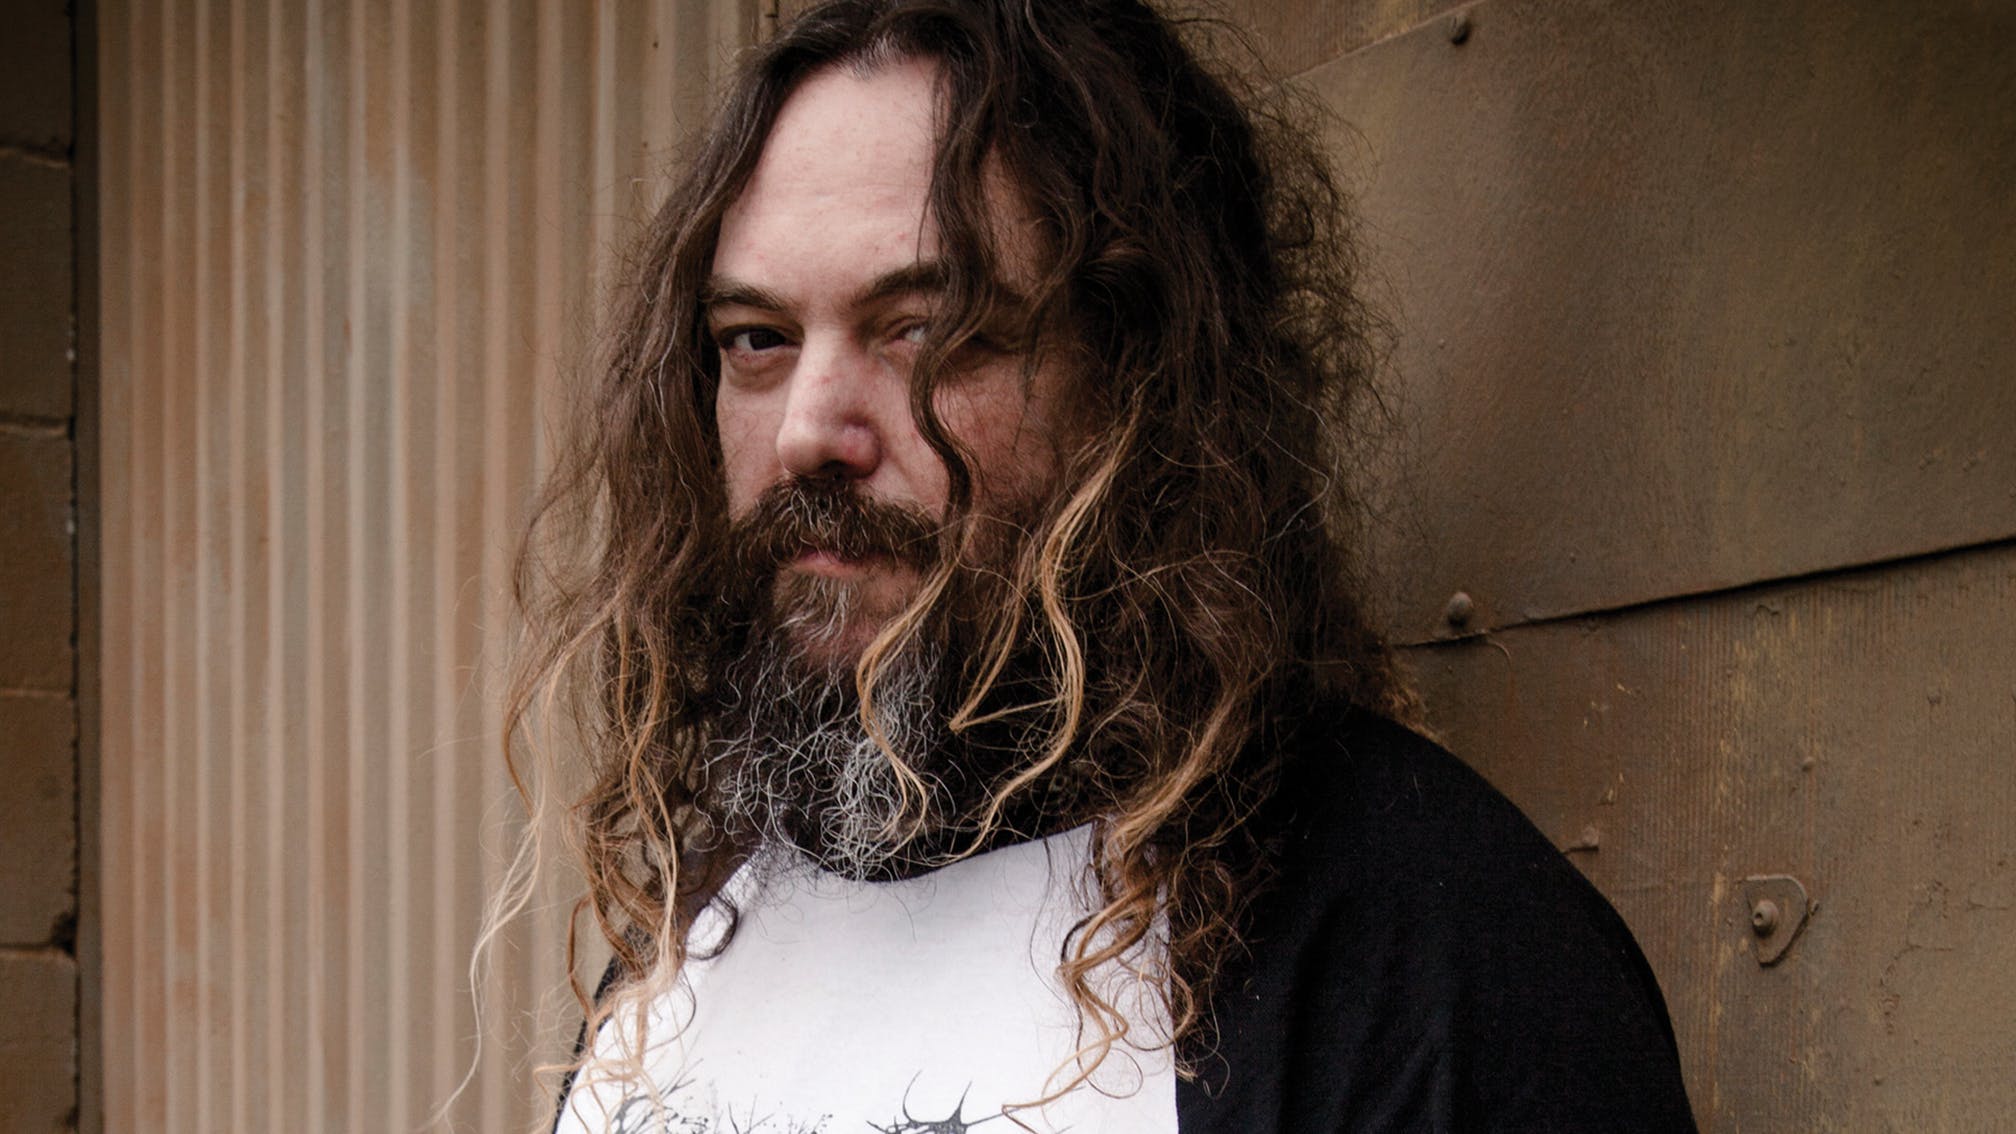 Happy 50th birthday to Max Cavalera! In celebration, we ask you all to JUMPDAFUCKUP! 